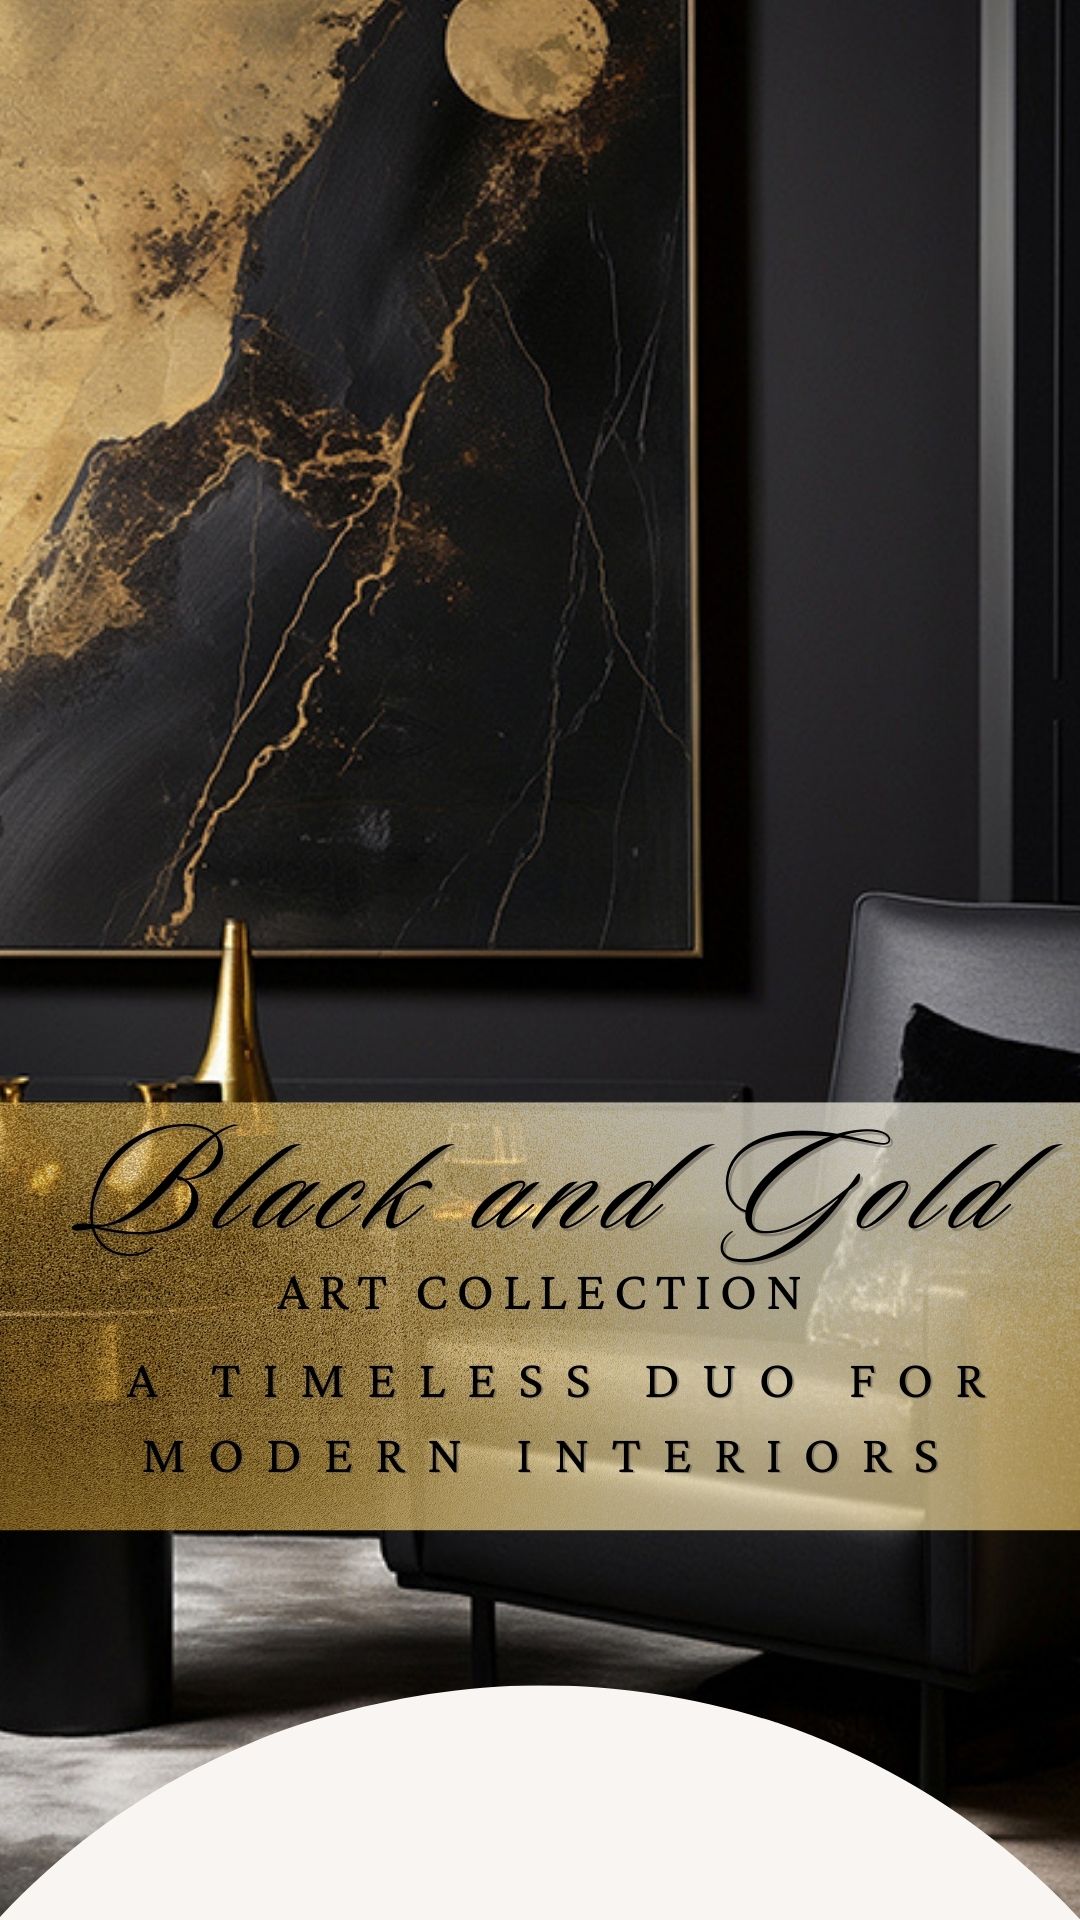 Black and Gold Art Collection